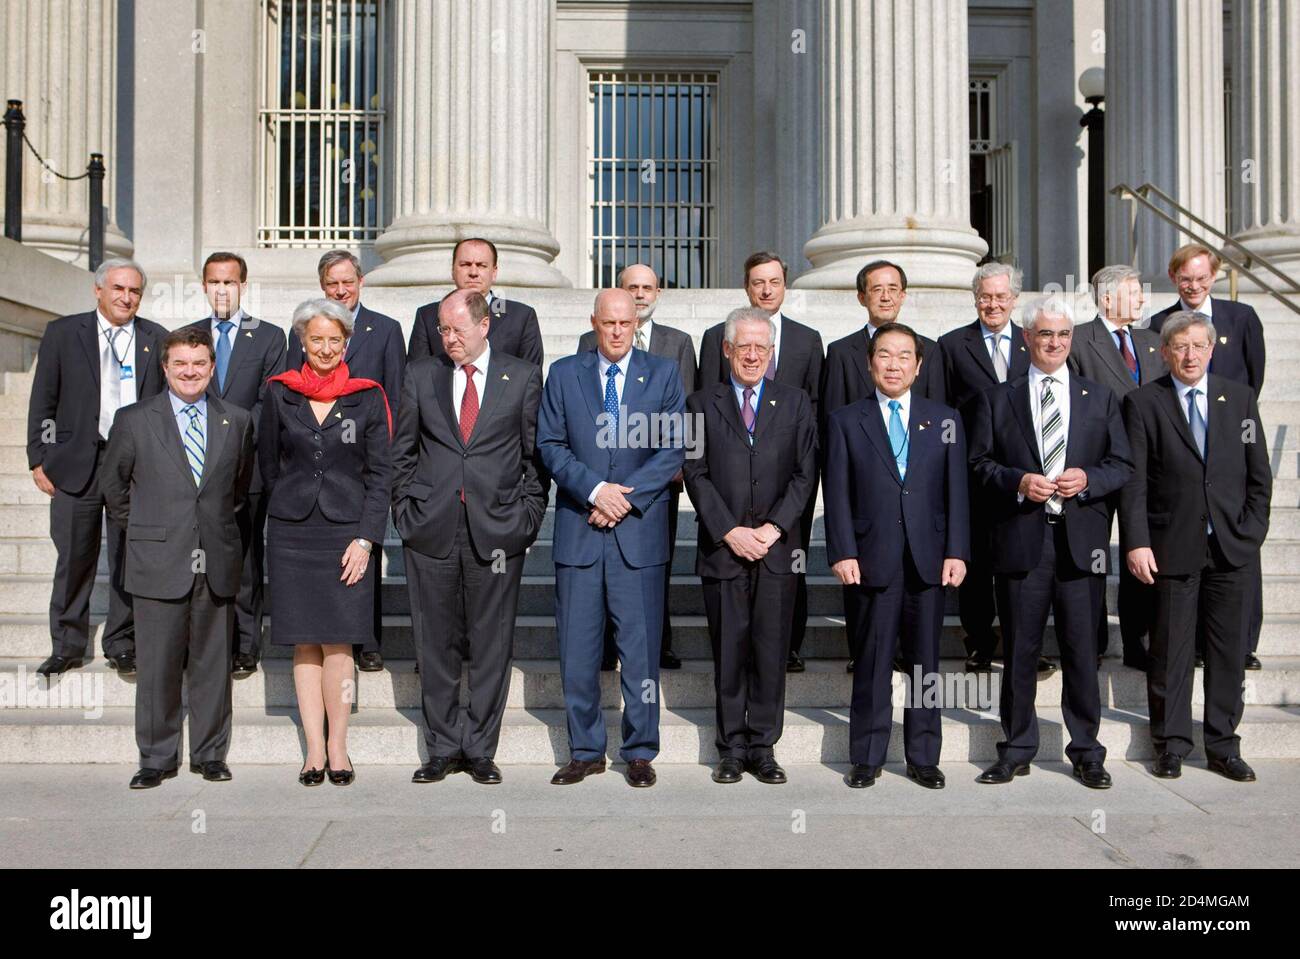 G7 finance ministers (front row) and central bank governors (back row) gather for a group picture during meetings at the U.S. Treasury Department in Washington April 11 2008. Front row (L-R): Canadian Finance Minister Jim Flaherty French Finance Minister Christine Lagarde German Finance Minister Peer Steinbrueck U.S. Treasury Secretary Henry Paulson Italy's Finance Minister Tommaso Padoa-Schioppa Japan's Finance Minister Fukushiro Nukaga UK Chancellor of the Exchequer Alistair Darling and Jean-Claude Juncker Chairman of the Eurogroup. Back row (L-R): IMF Managing Director Dominique Strauss-Kah Stock Photo